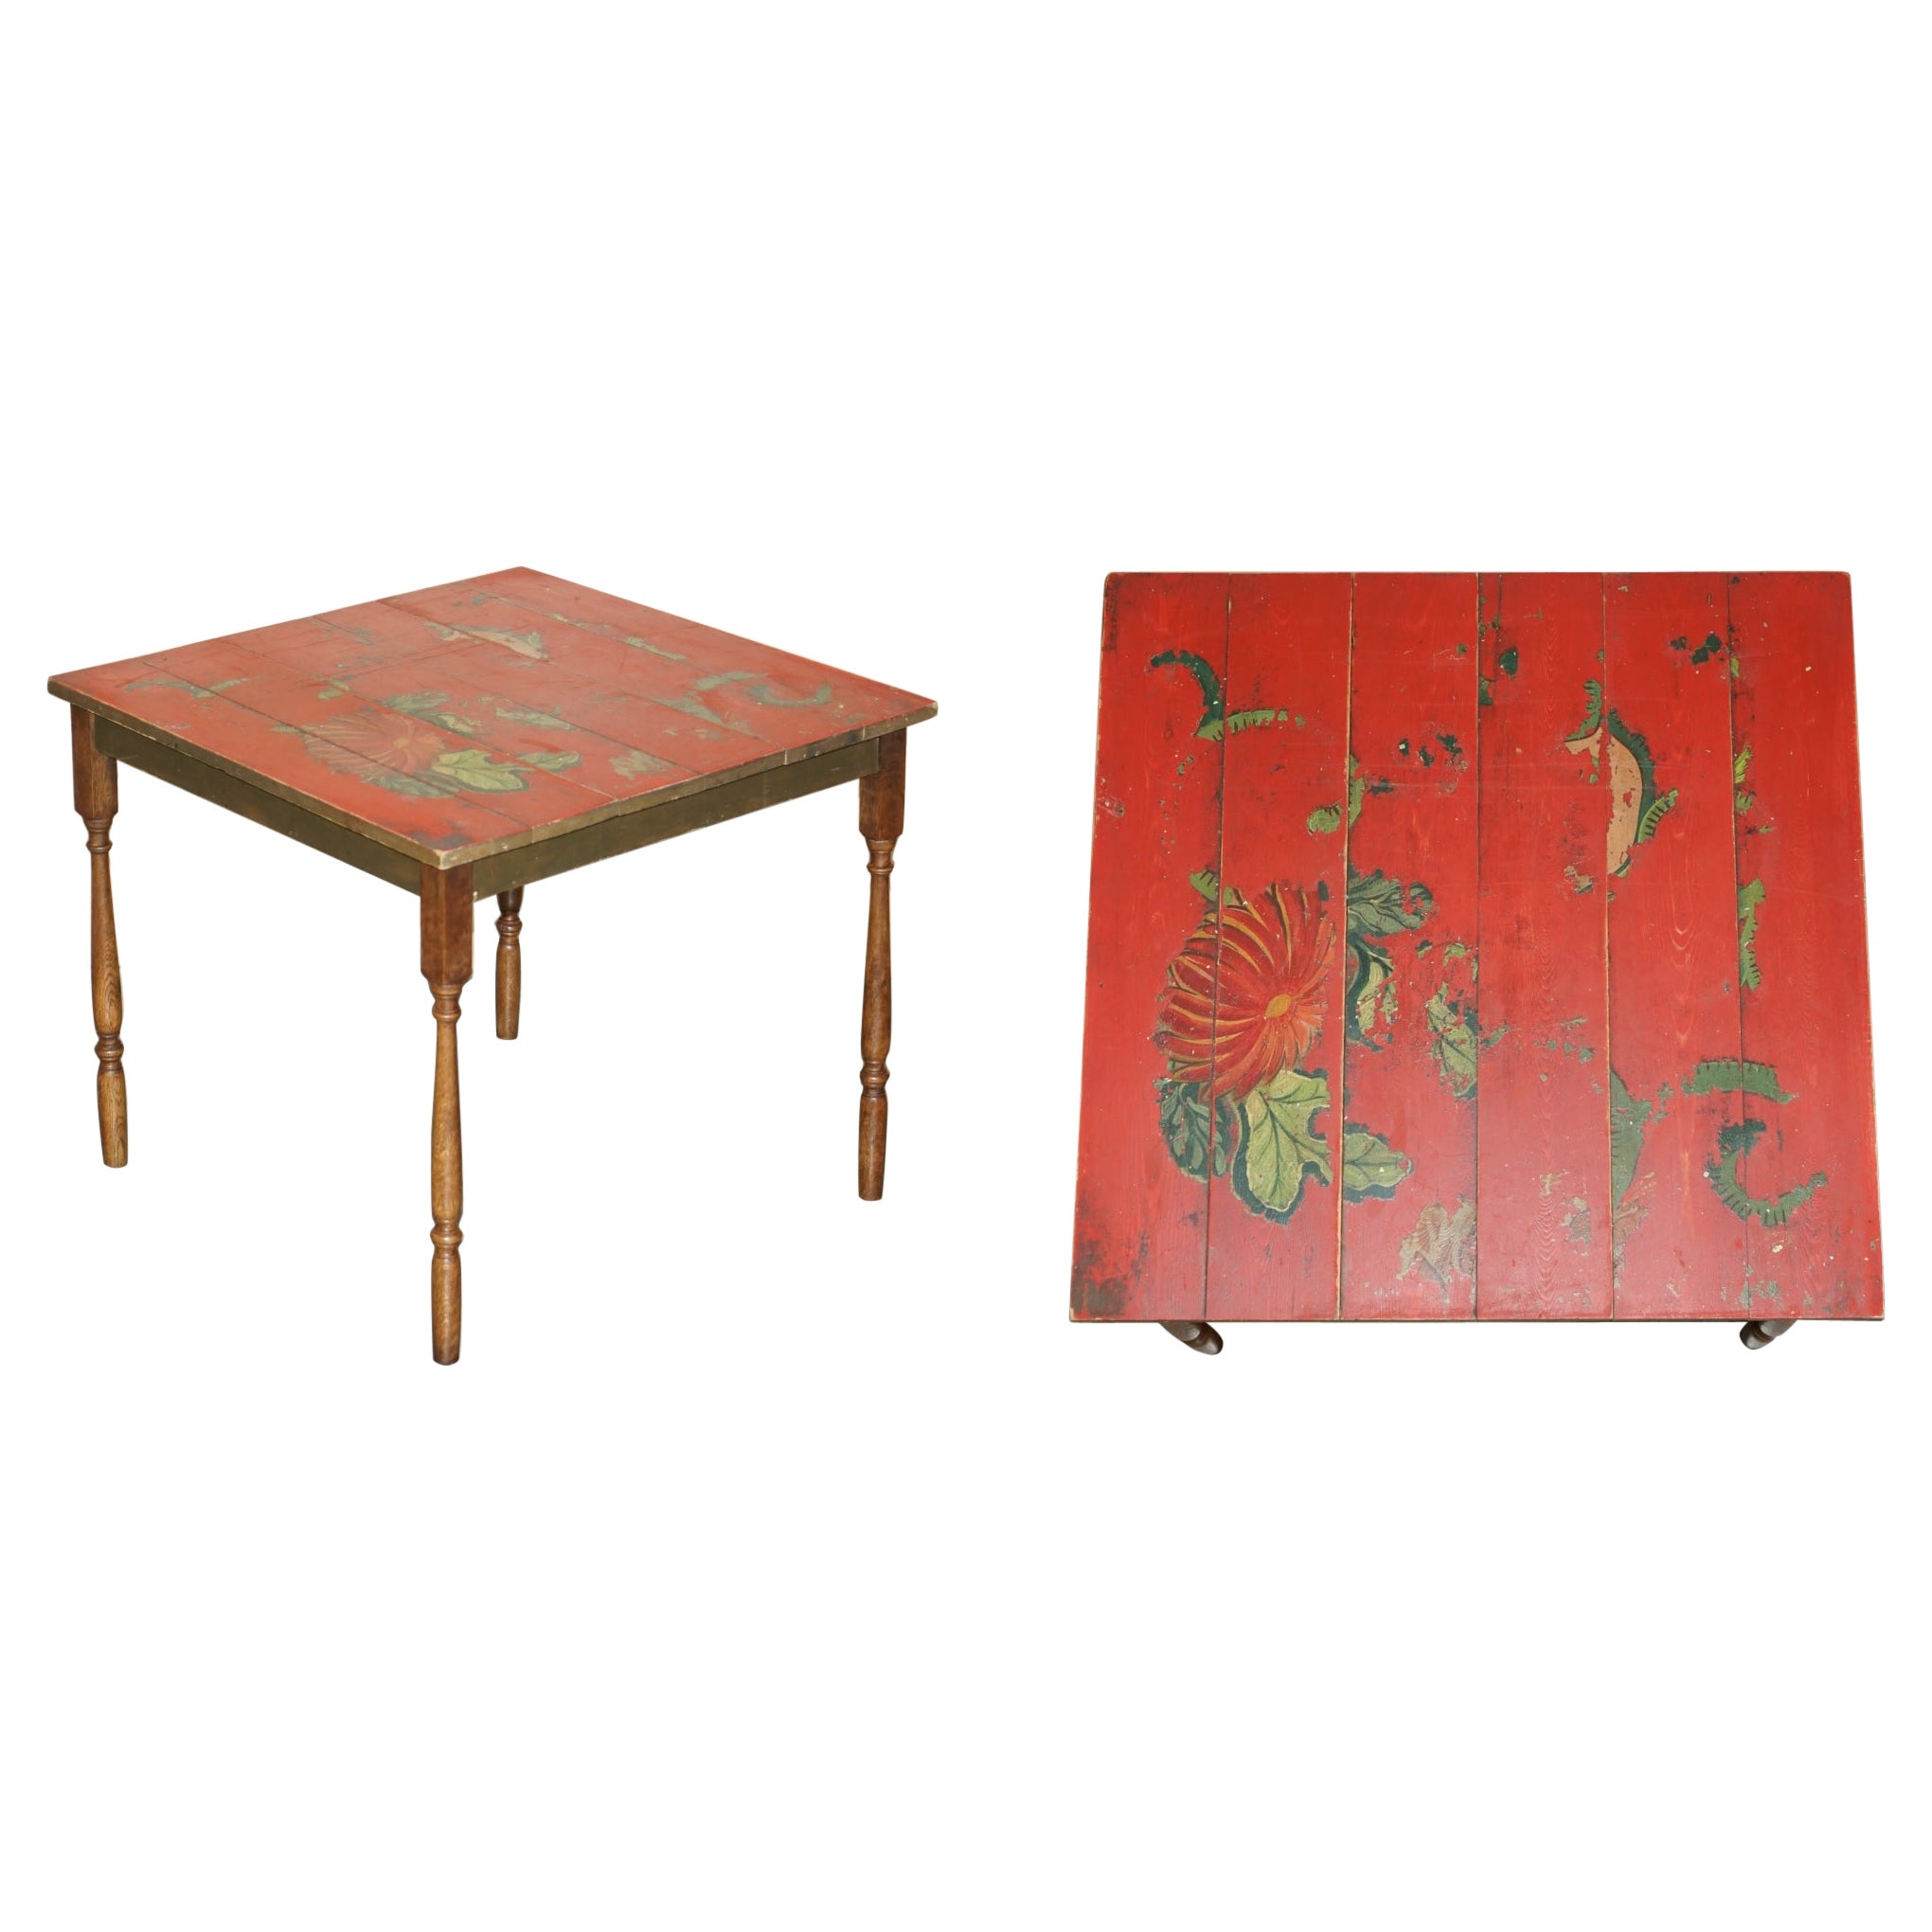 1 of 10 Antique Hand Painted French Pine Vendange Wine Tasting Tables Lovely For Sale